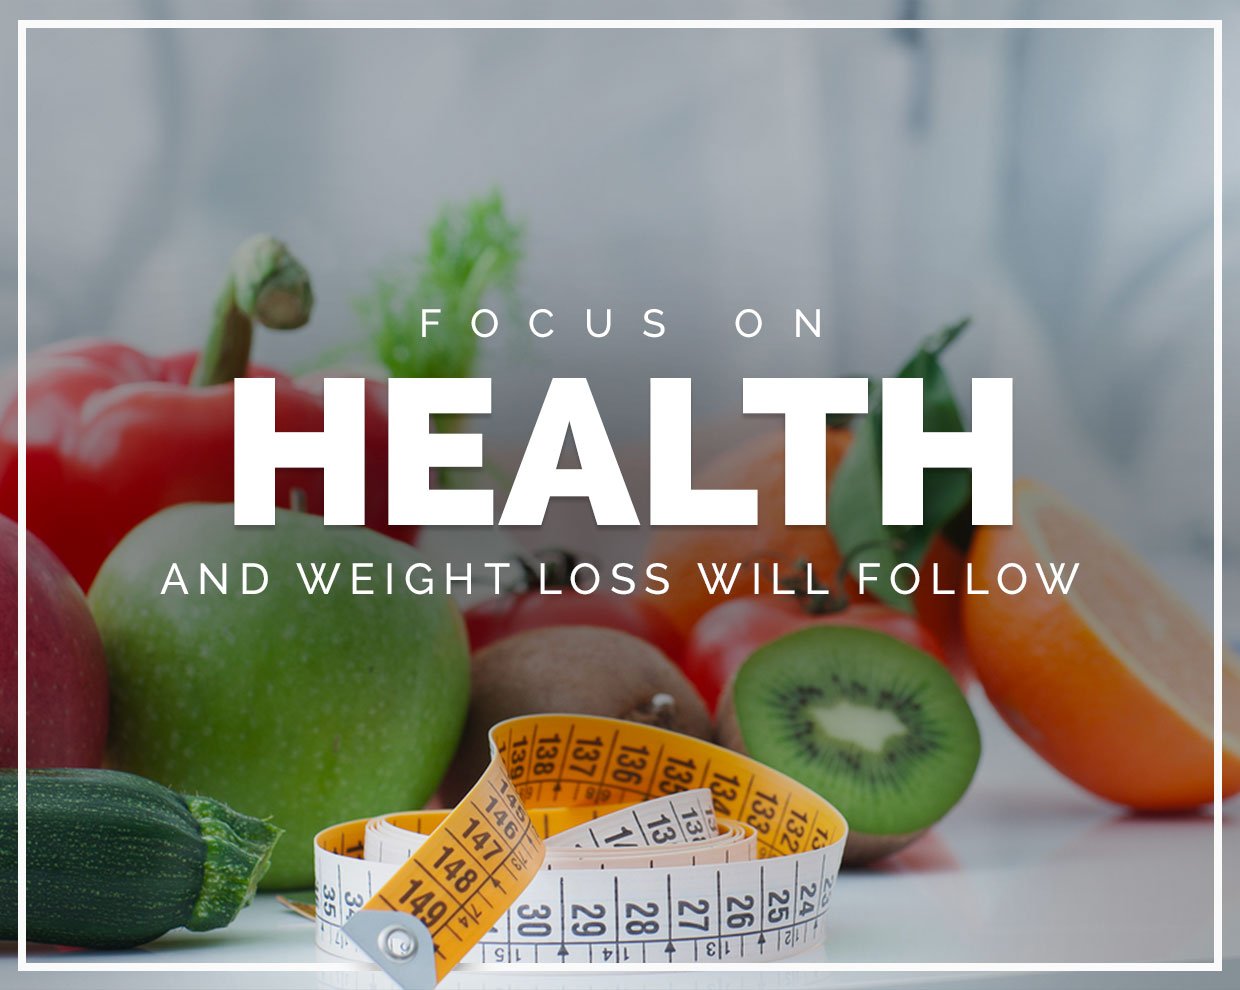 Focus on Health and the Weight Loss Will Follow